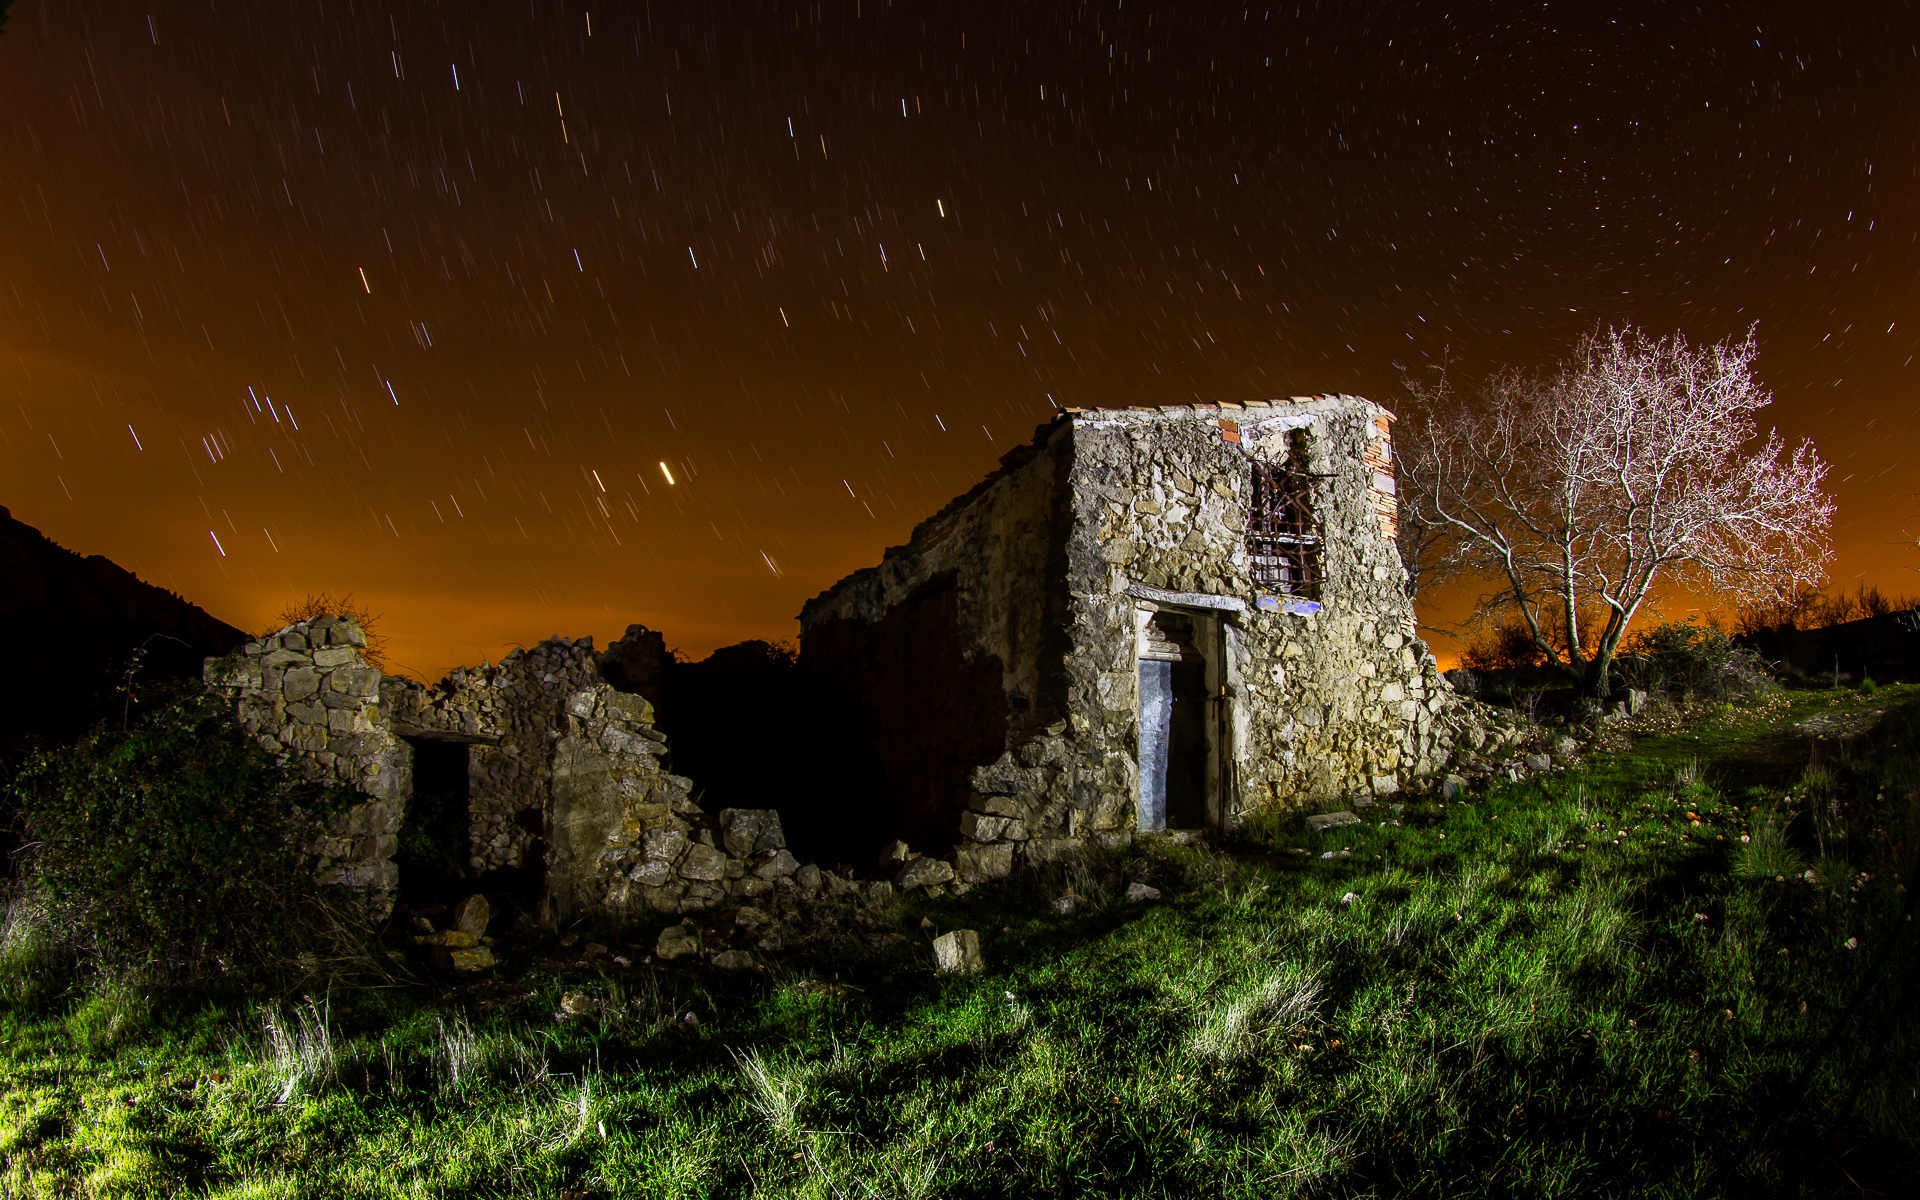 house, Stars, Night, Timelapse, Grass, Tree, Sky, Landscapes, Buildings, Ruins Wallpaper